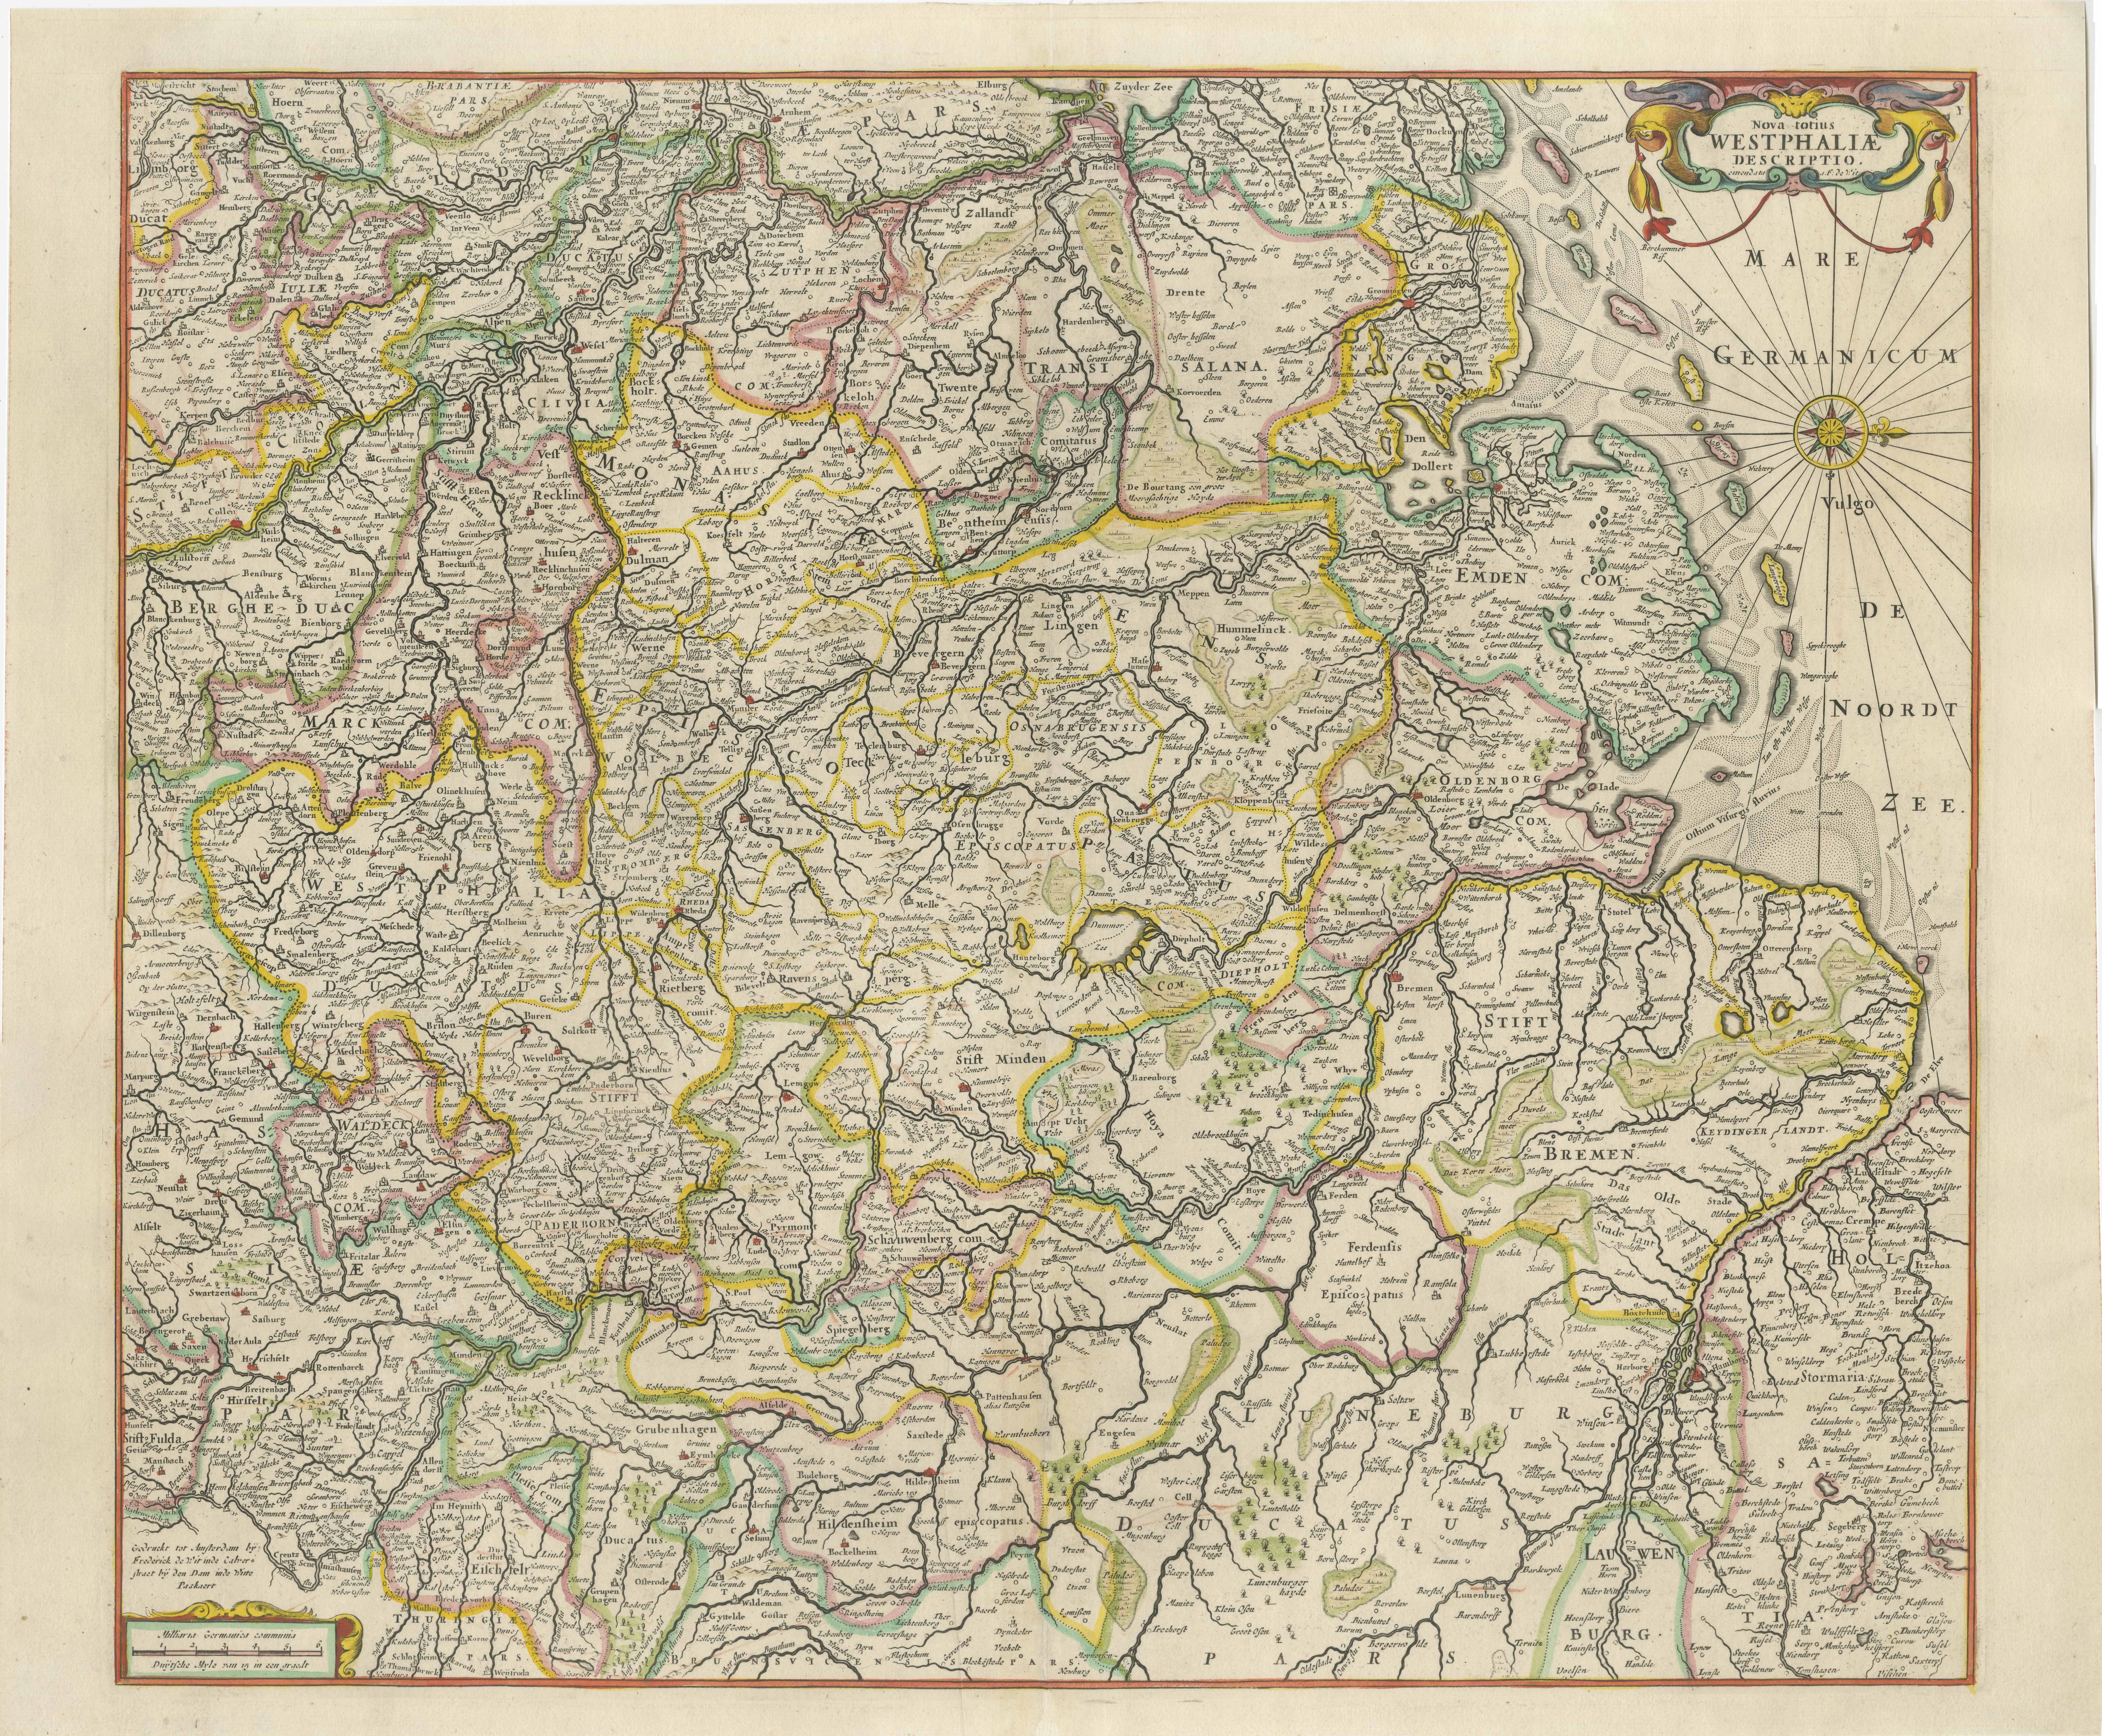 Antique map titled 'Nova totius Westphaliae Descriptio'. Detailed map of Westphalia, Northern Germany. Oriented to the west. The area shown extends from Hamburg in the north to Marburg in the south and from Arnhem in the west to Halberstadt in the